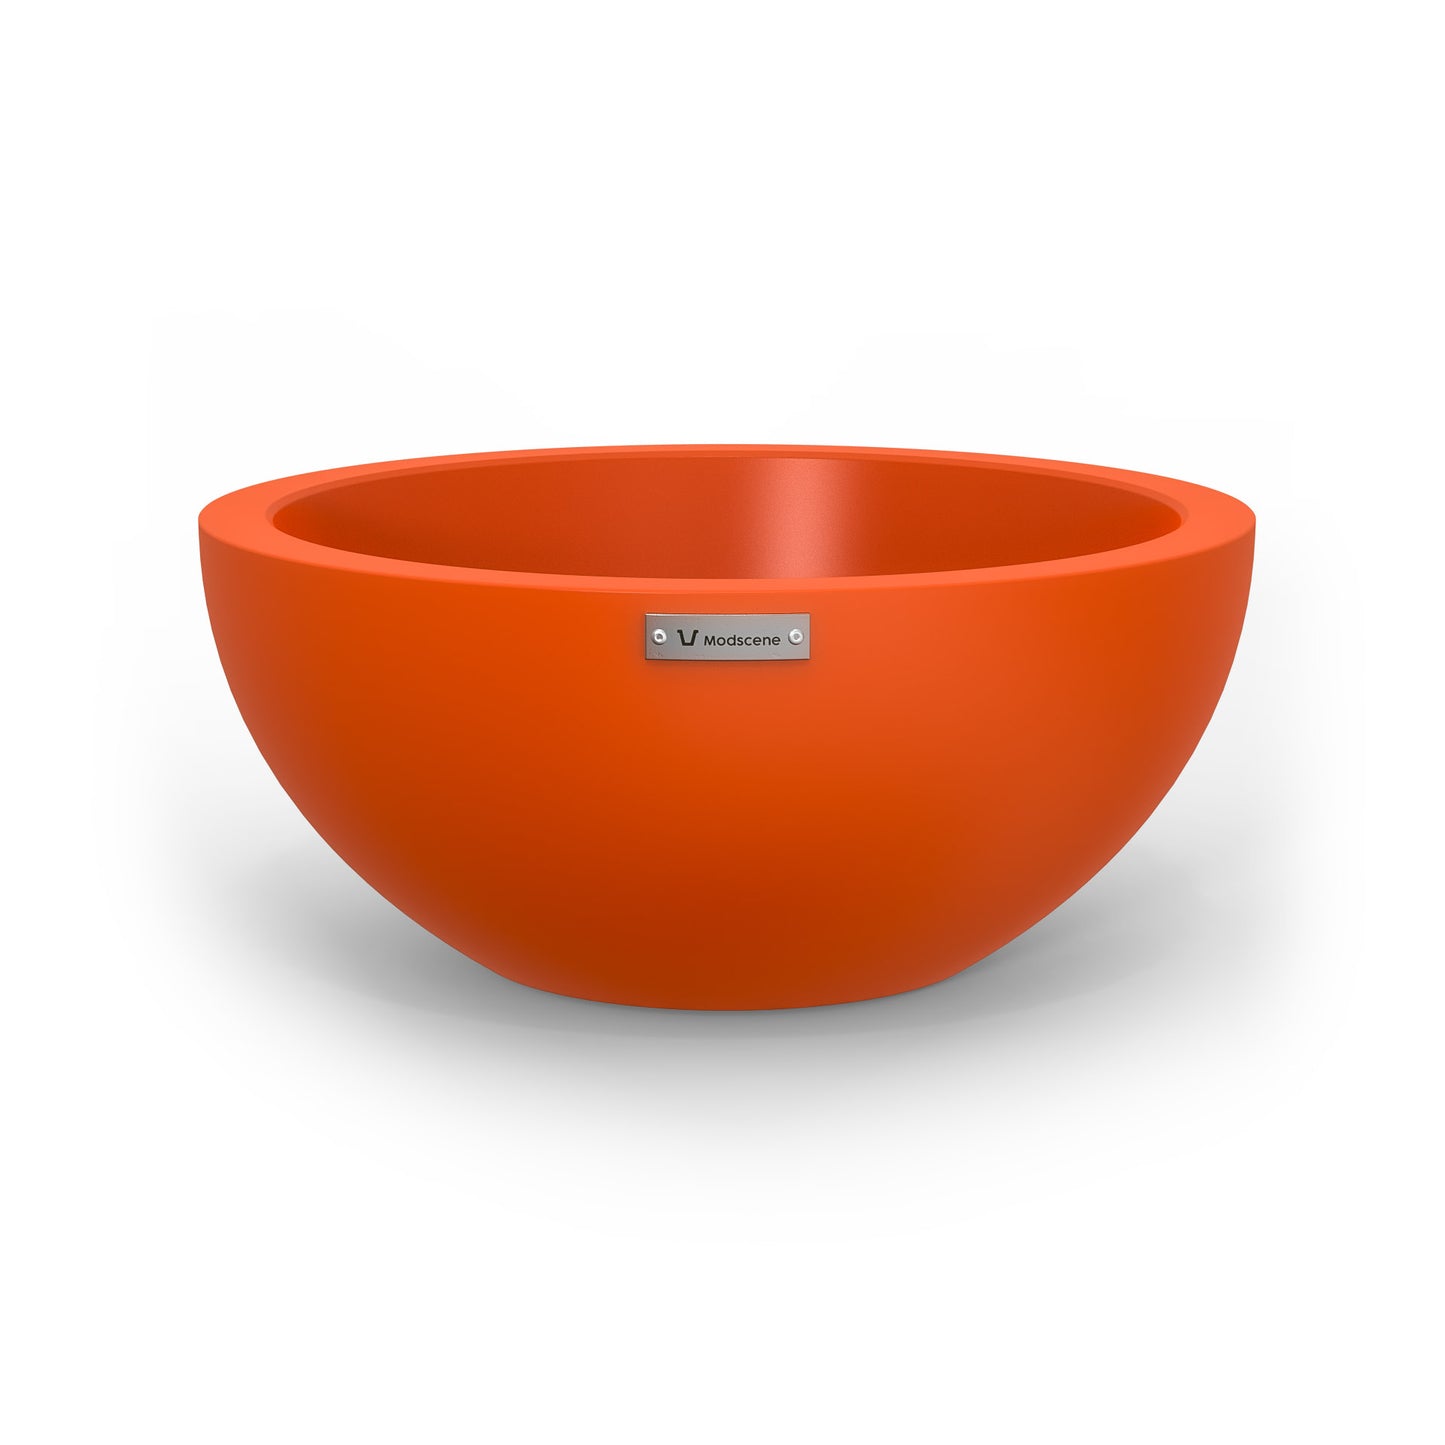 A small planter bowl in orange made by Modscene.